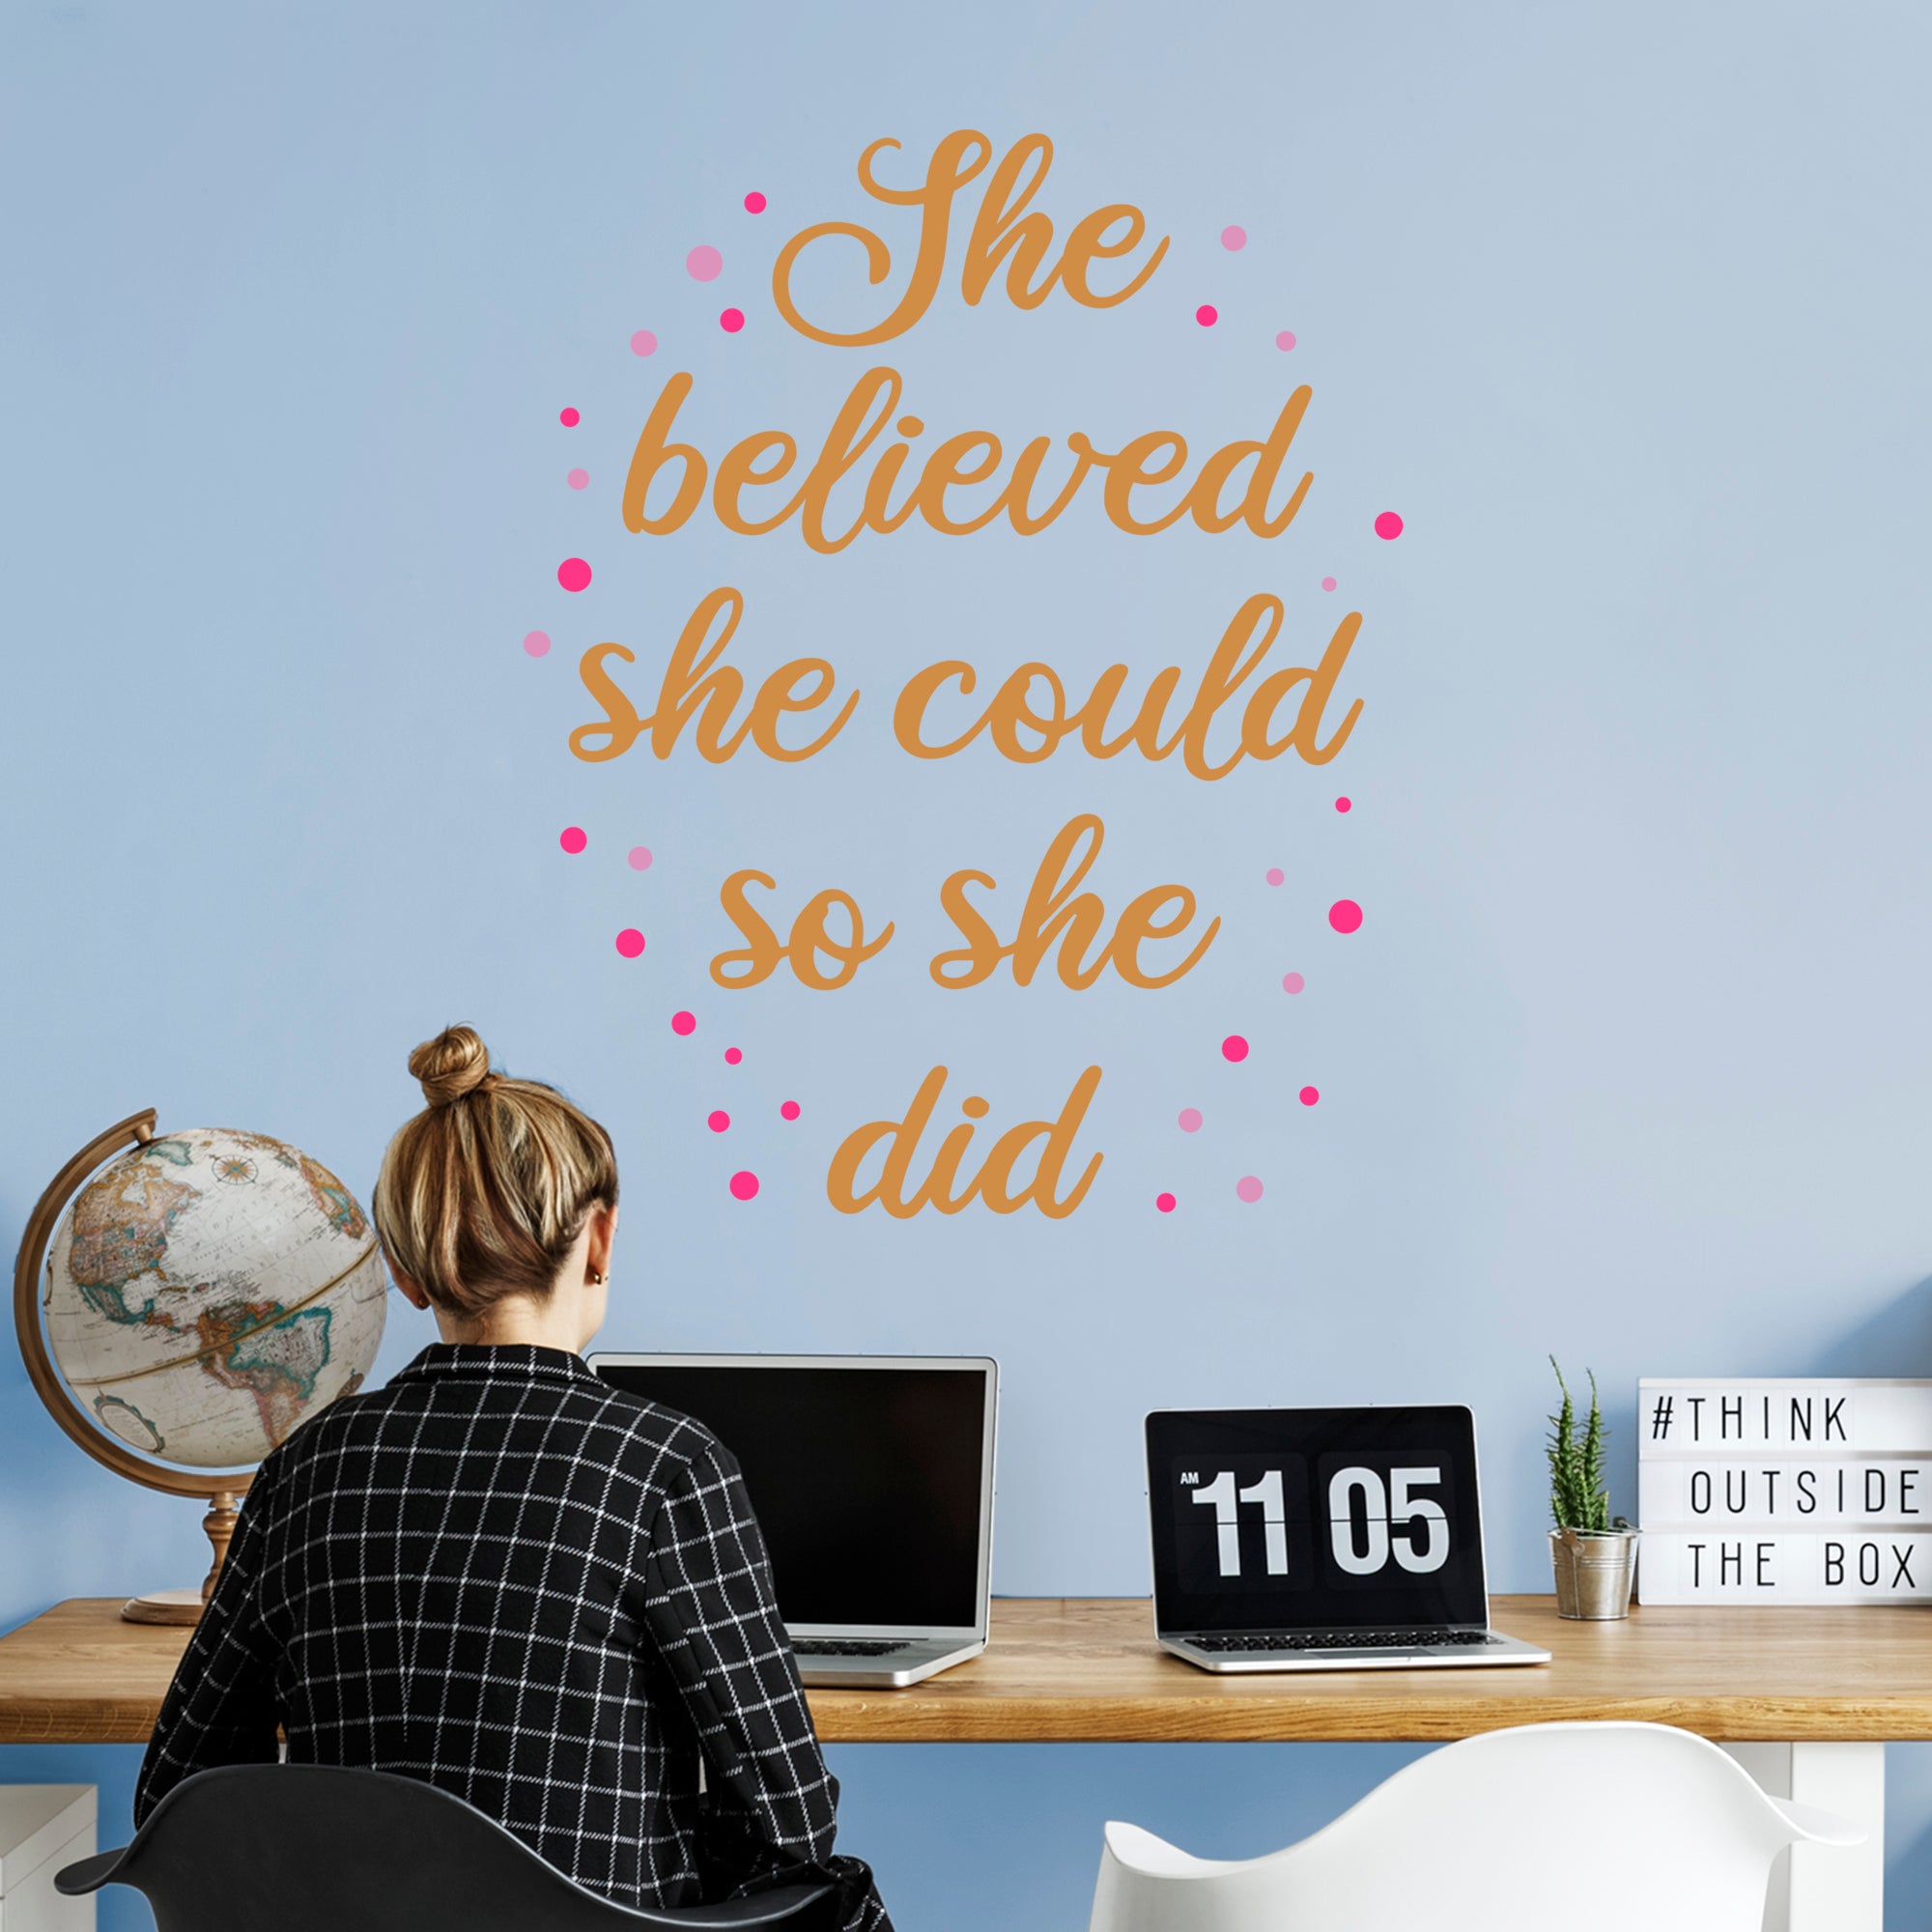 Pre-mask She Believed She Could So She Did - Removable Wall Decal Giant Transfer Decal (35"W x 43"H) by Fathead | Vinyl